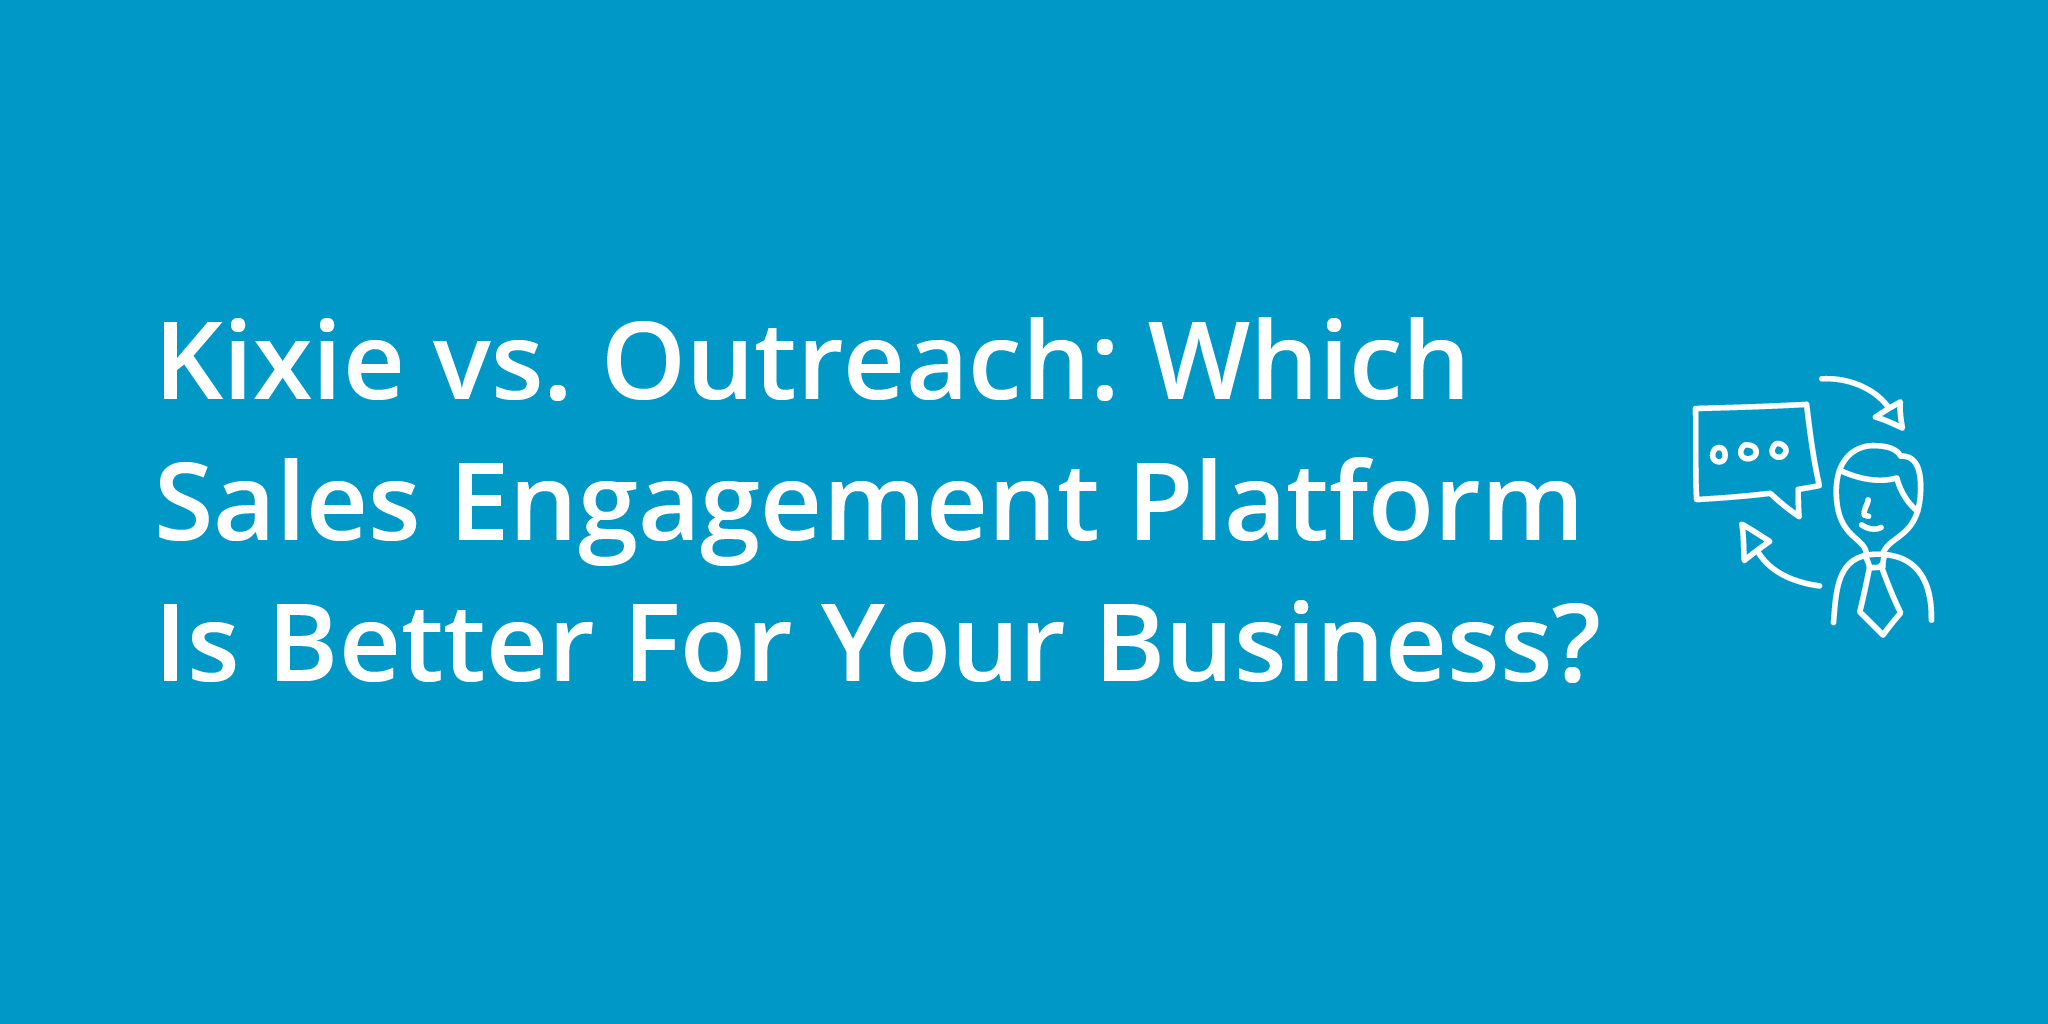 Kixie vs. Outreach: Which Sales Engagement Platform Is Better For Your Business?